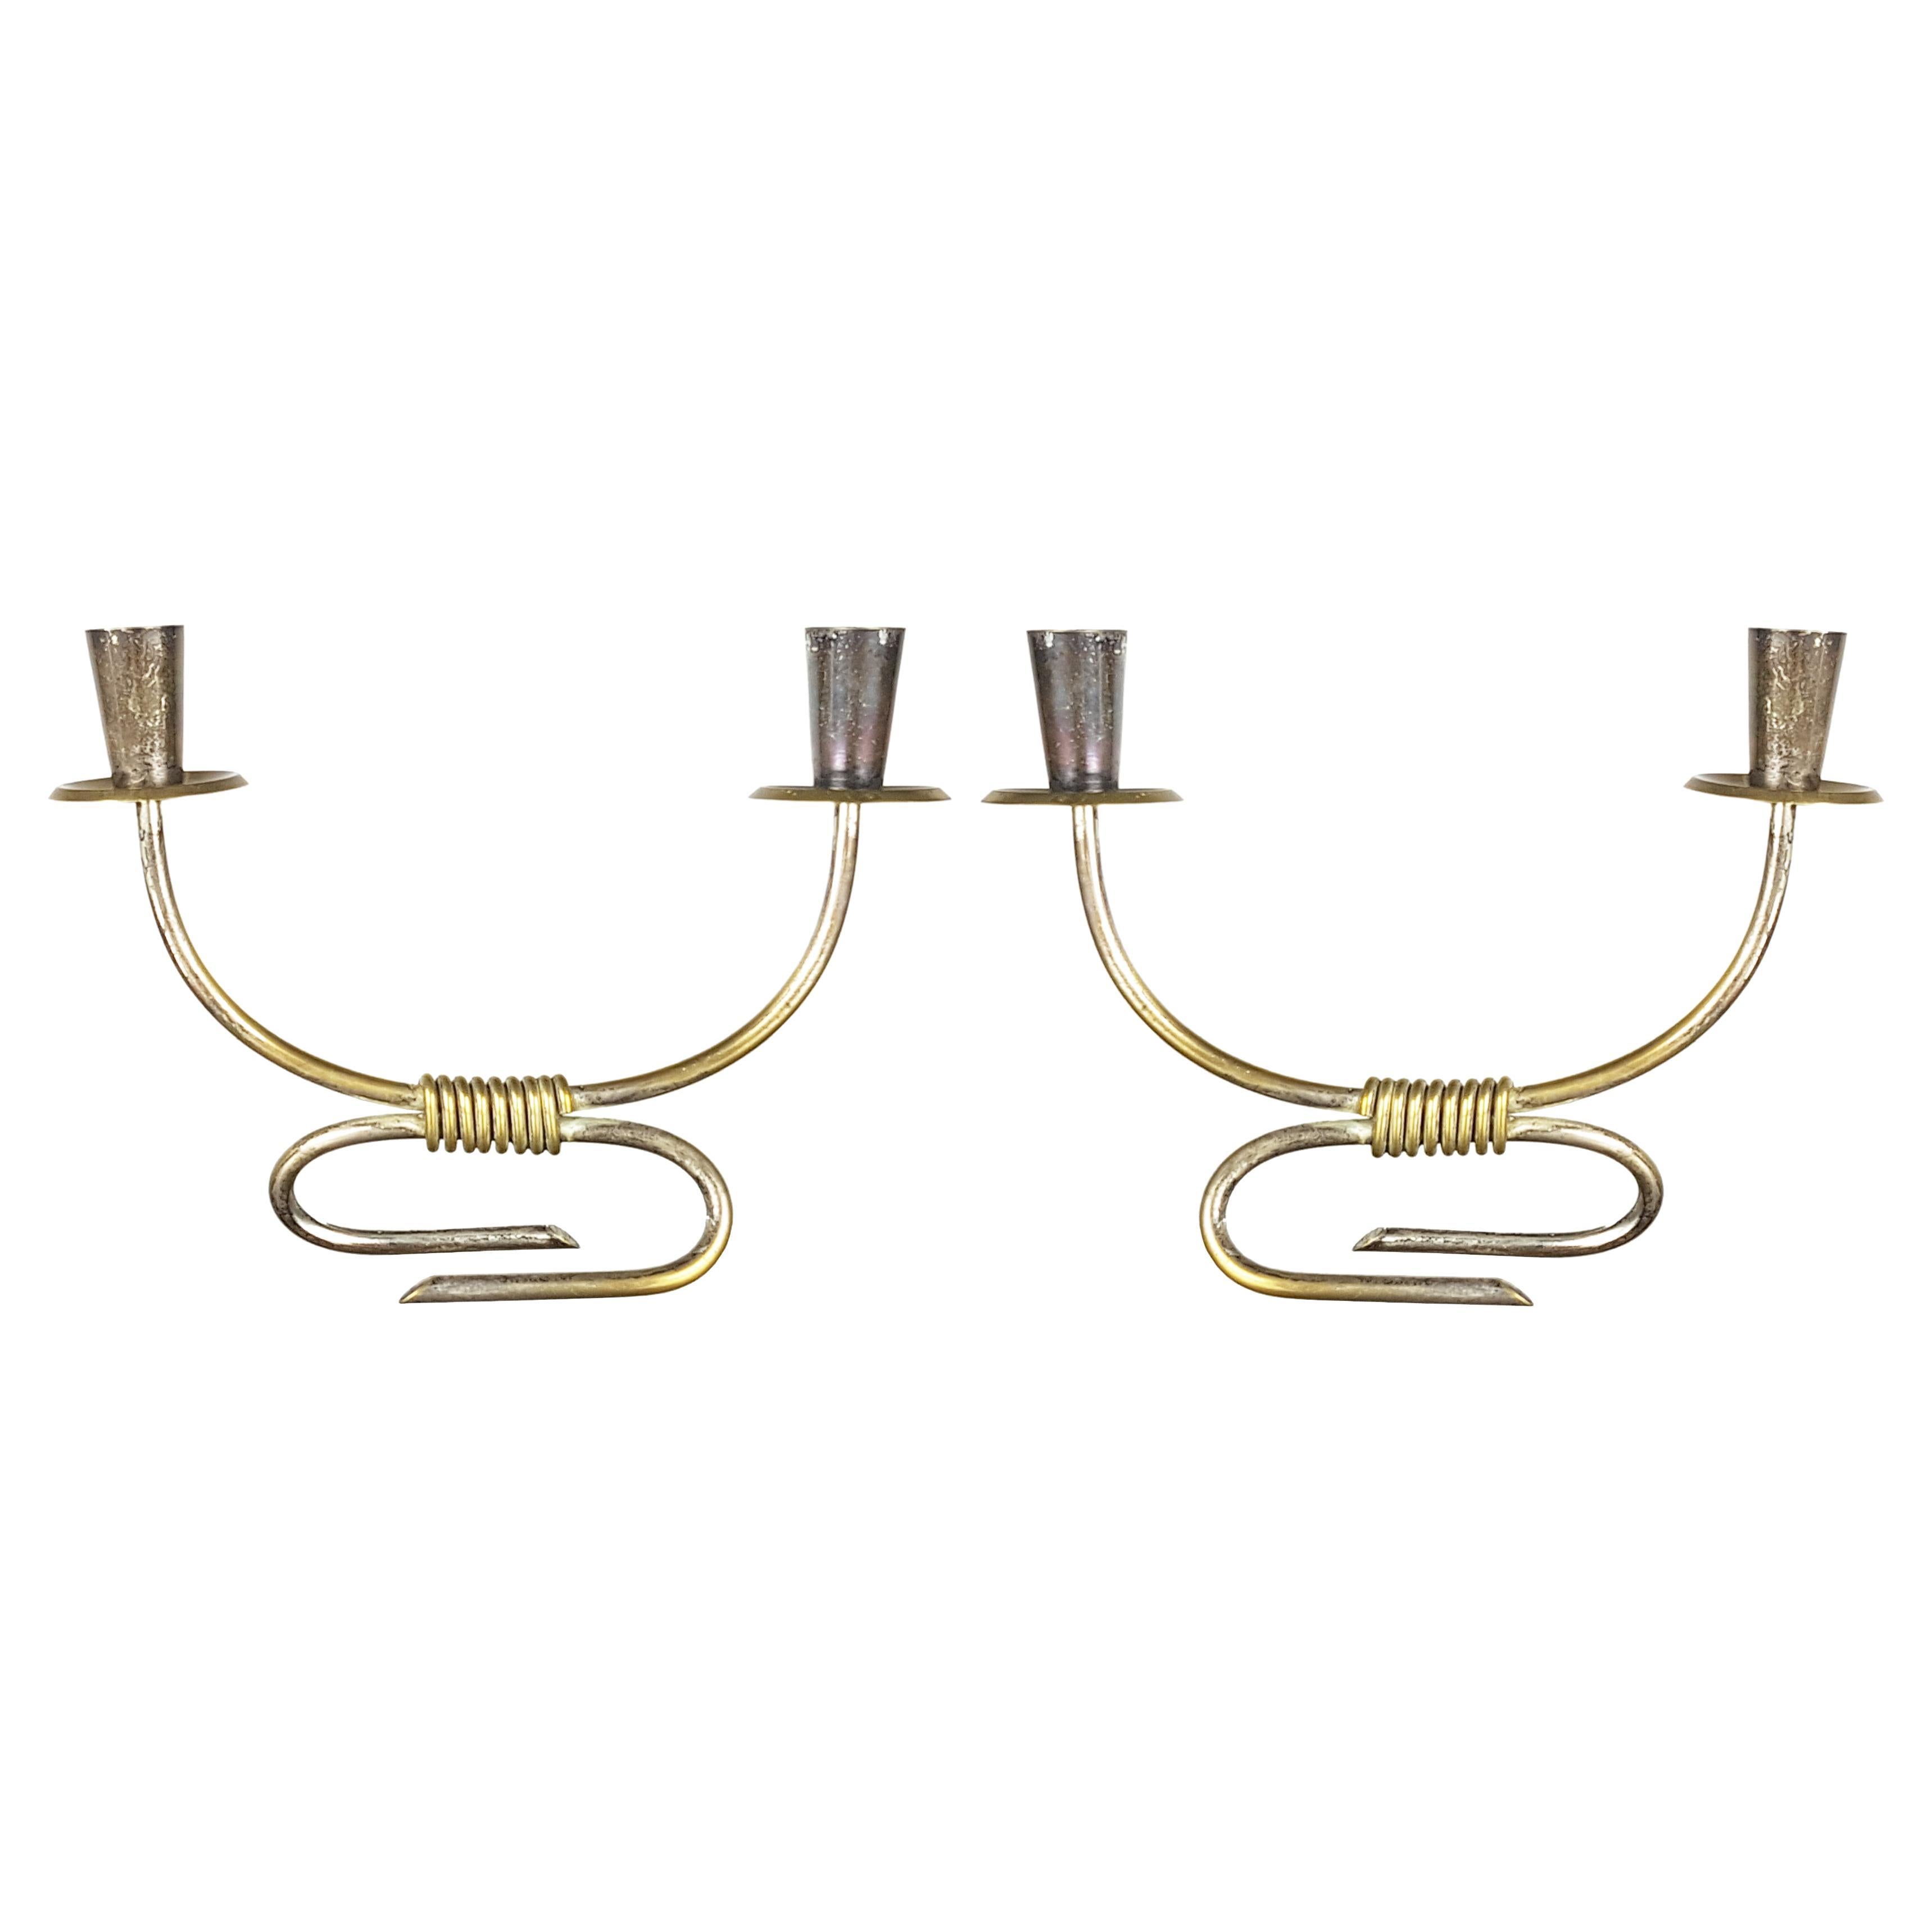 Silver Plated Brass Mid-Century Modern Candleholders by Aldo Tura for Macabo For Sale